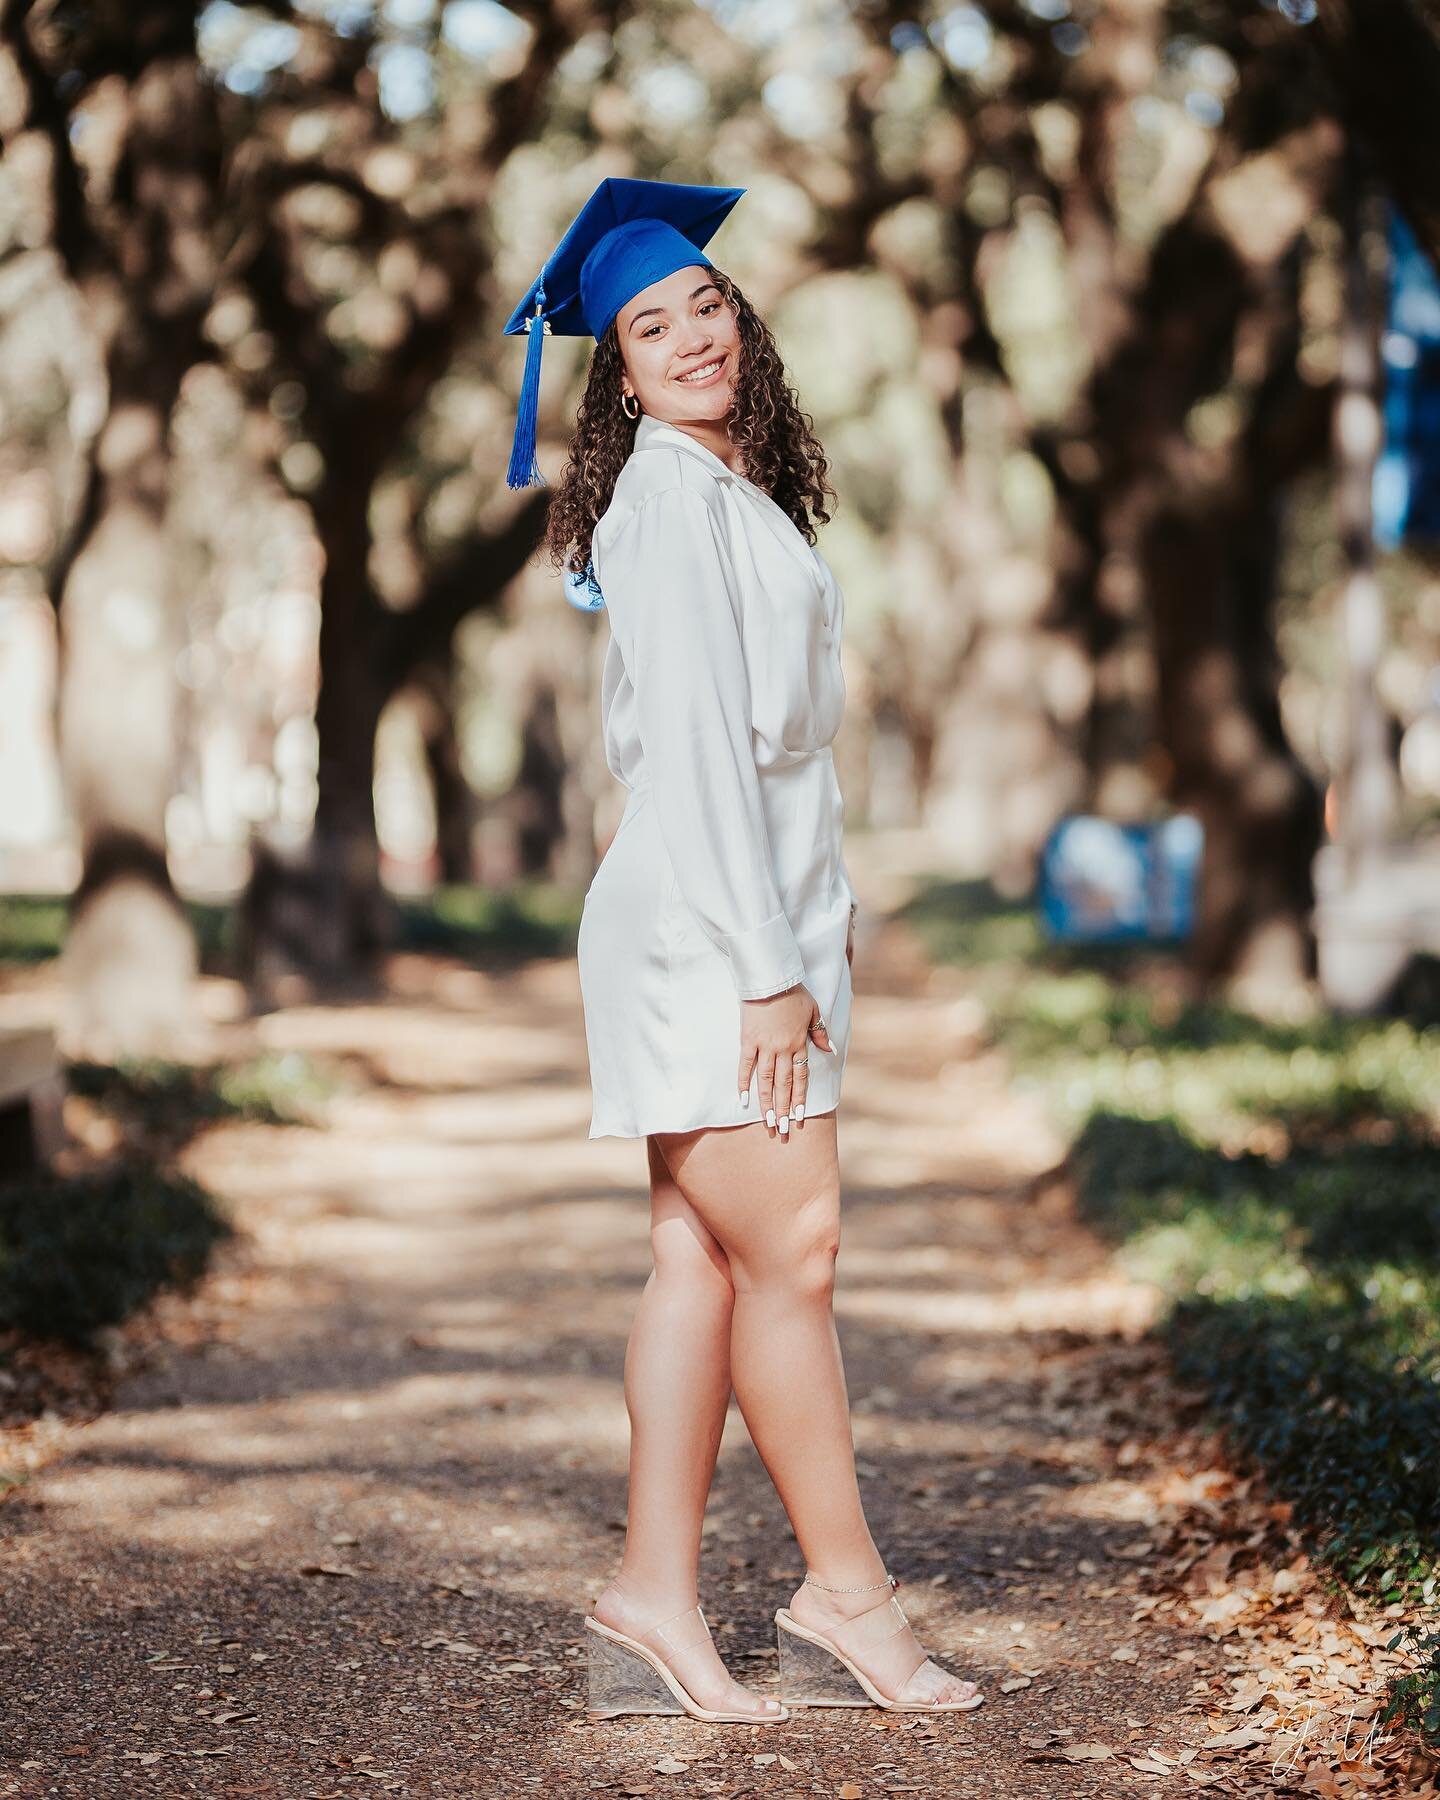 Turning a page &amp; starting a new chapter🎓

And just like that&hellip; It&rsquo;s graduation season again! Be sure to book your graduation &amp; senior pictures before spots fill up. 

Got a discounted package for high school students available no